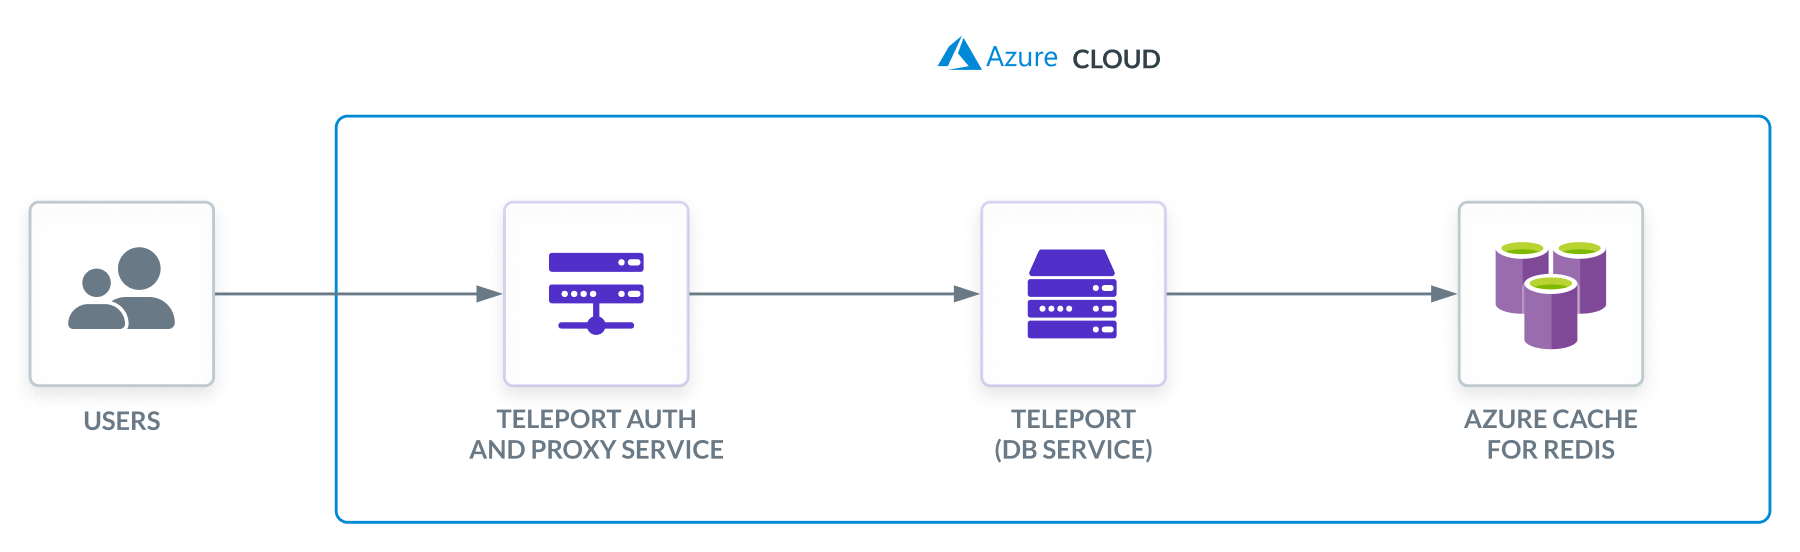 Teleport Database Access Azure Cache for Redis Self-Hosted